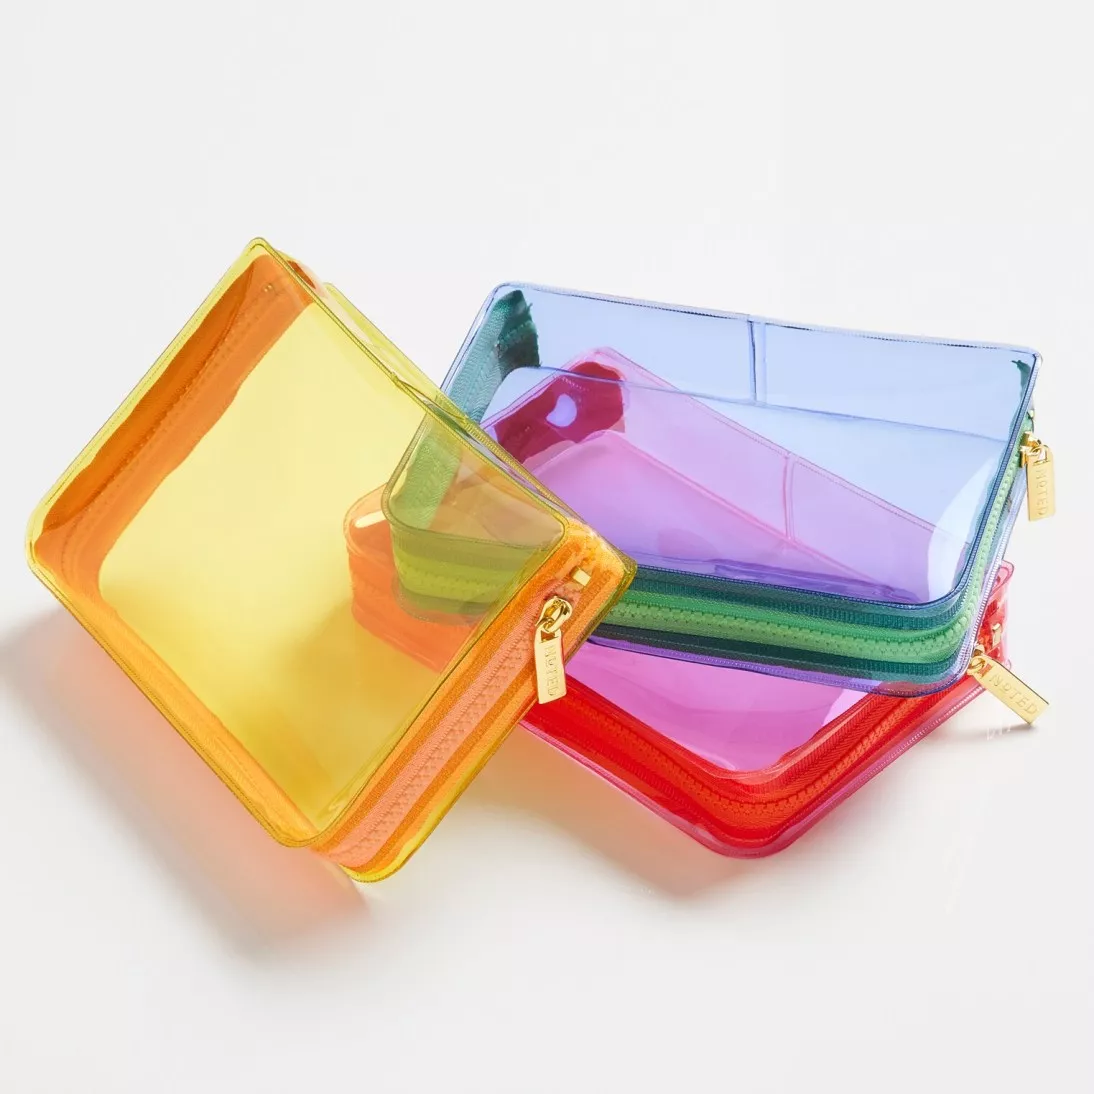 https://www.slipstream247.com/media/9beea78d45e5e4fa0a0c5112a6b357daeccacd75_three-clear-plastic-pouches-in-yellow-blue-and-red-as-a-part-of-the-noted-by-post-it-product-collecti.webp